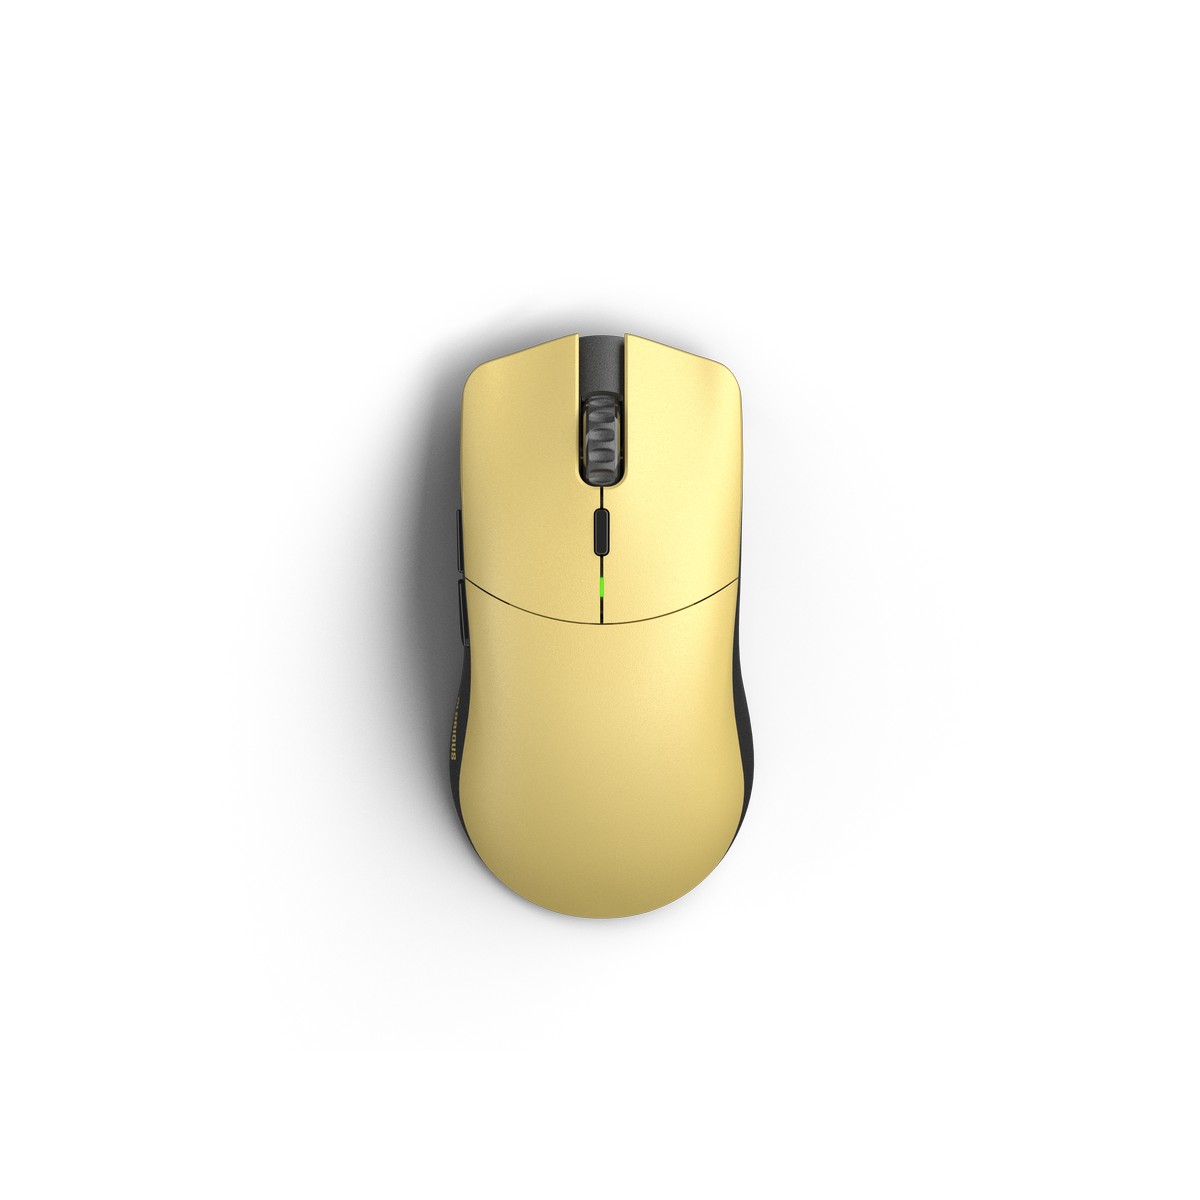 Glorious - Glorious Model O PRO Wireless Optical Gaming Mouse - Golden Panda (GLO-MS-OW-GP-FORGE)